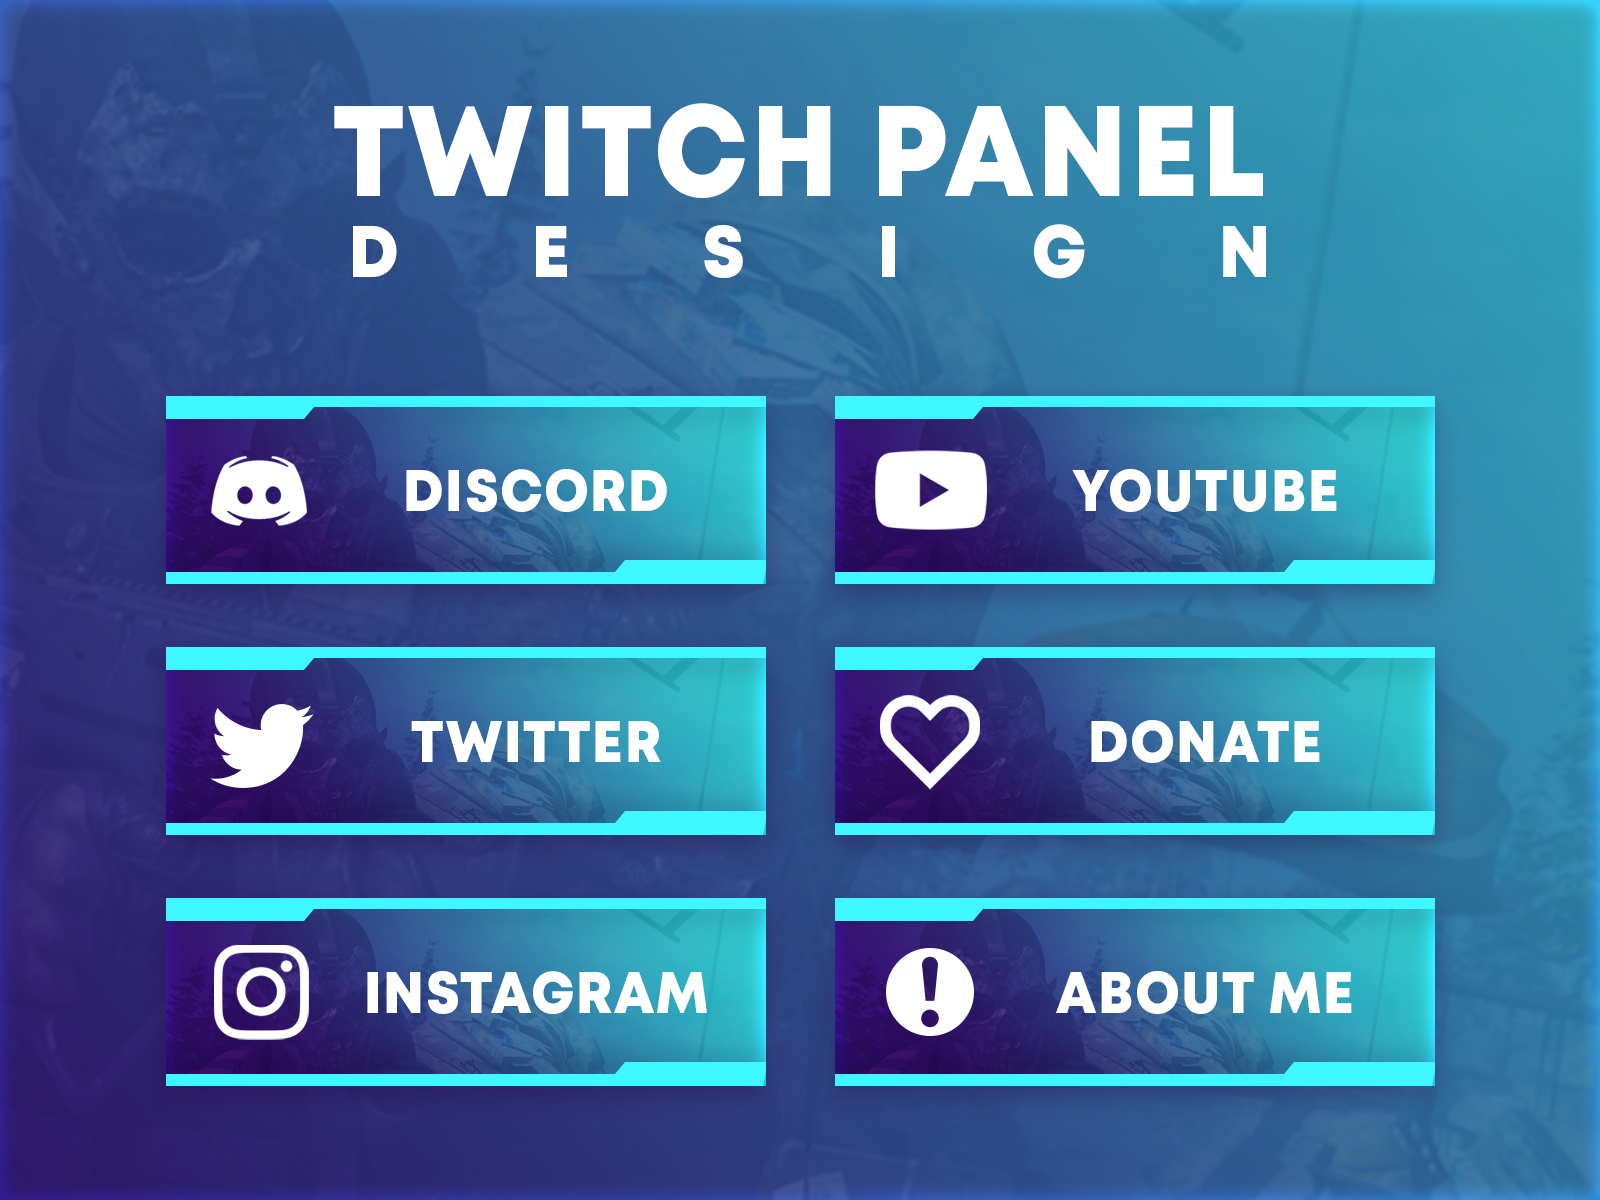 Twitch Panel Design by Ammad khan on Dribbble